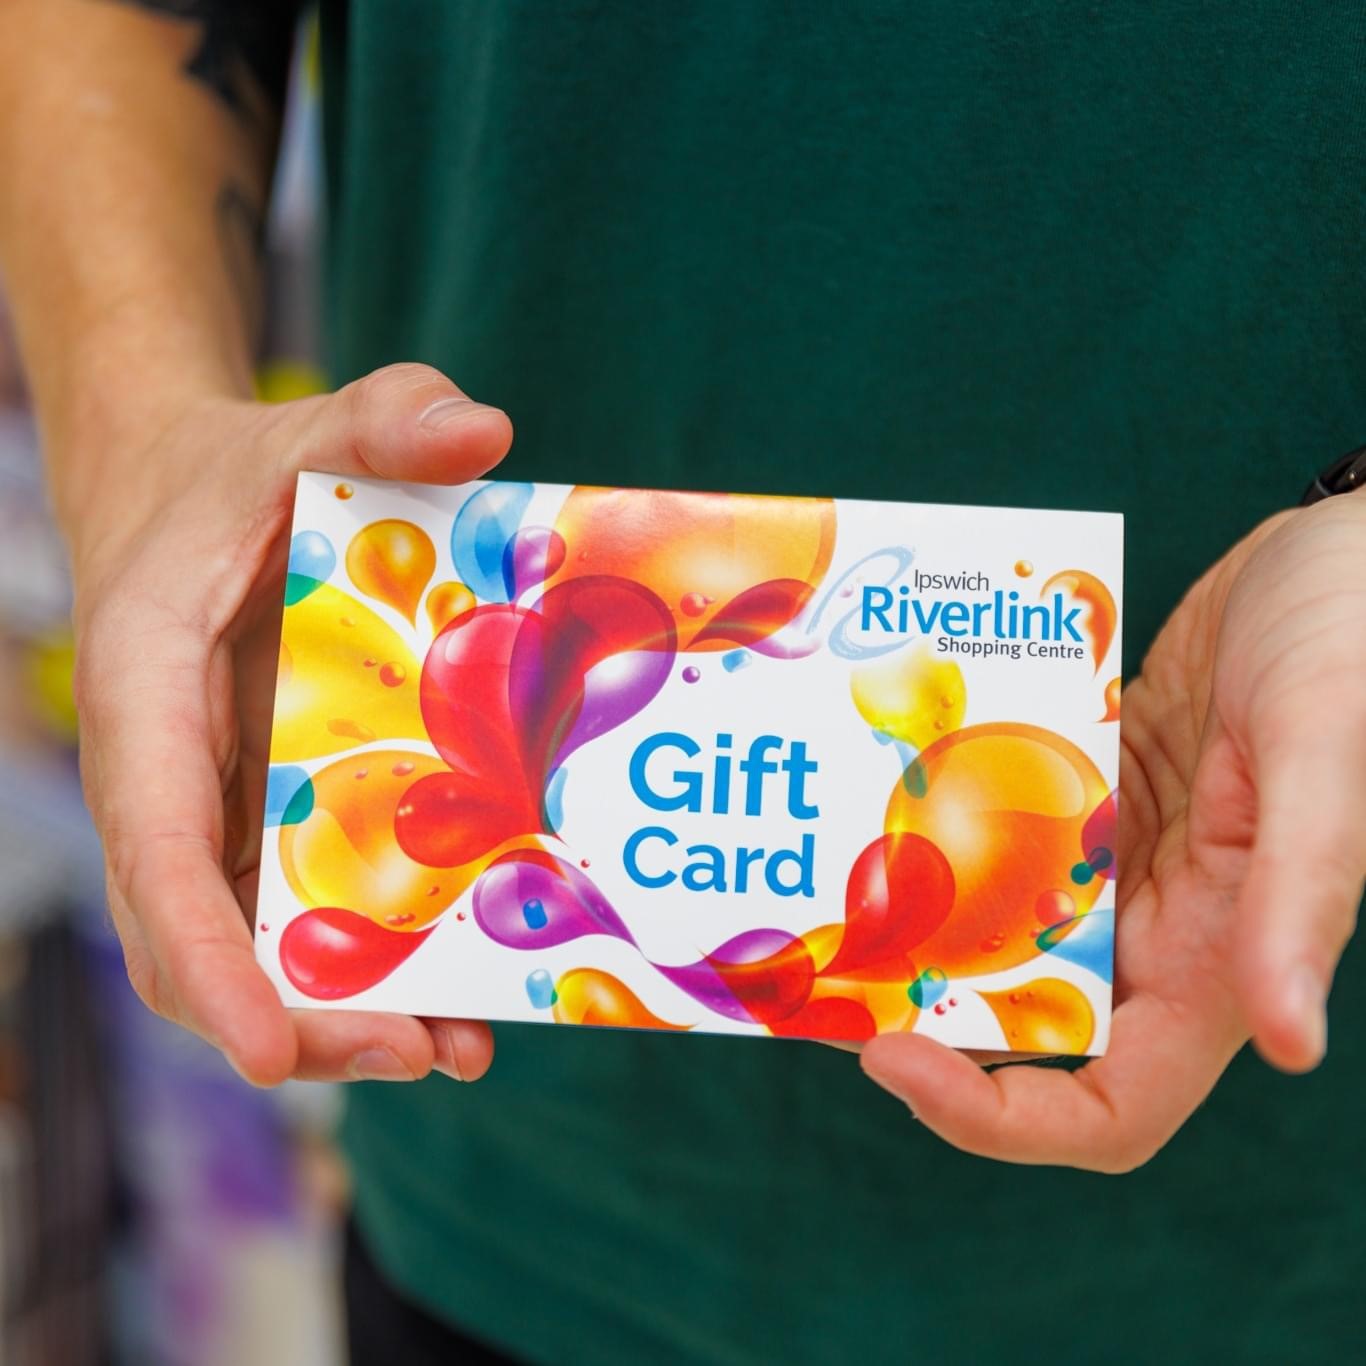 Riverlink gift vouchers are available.